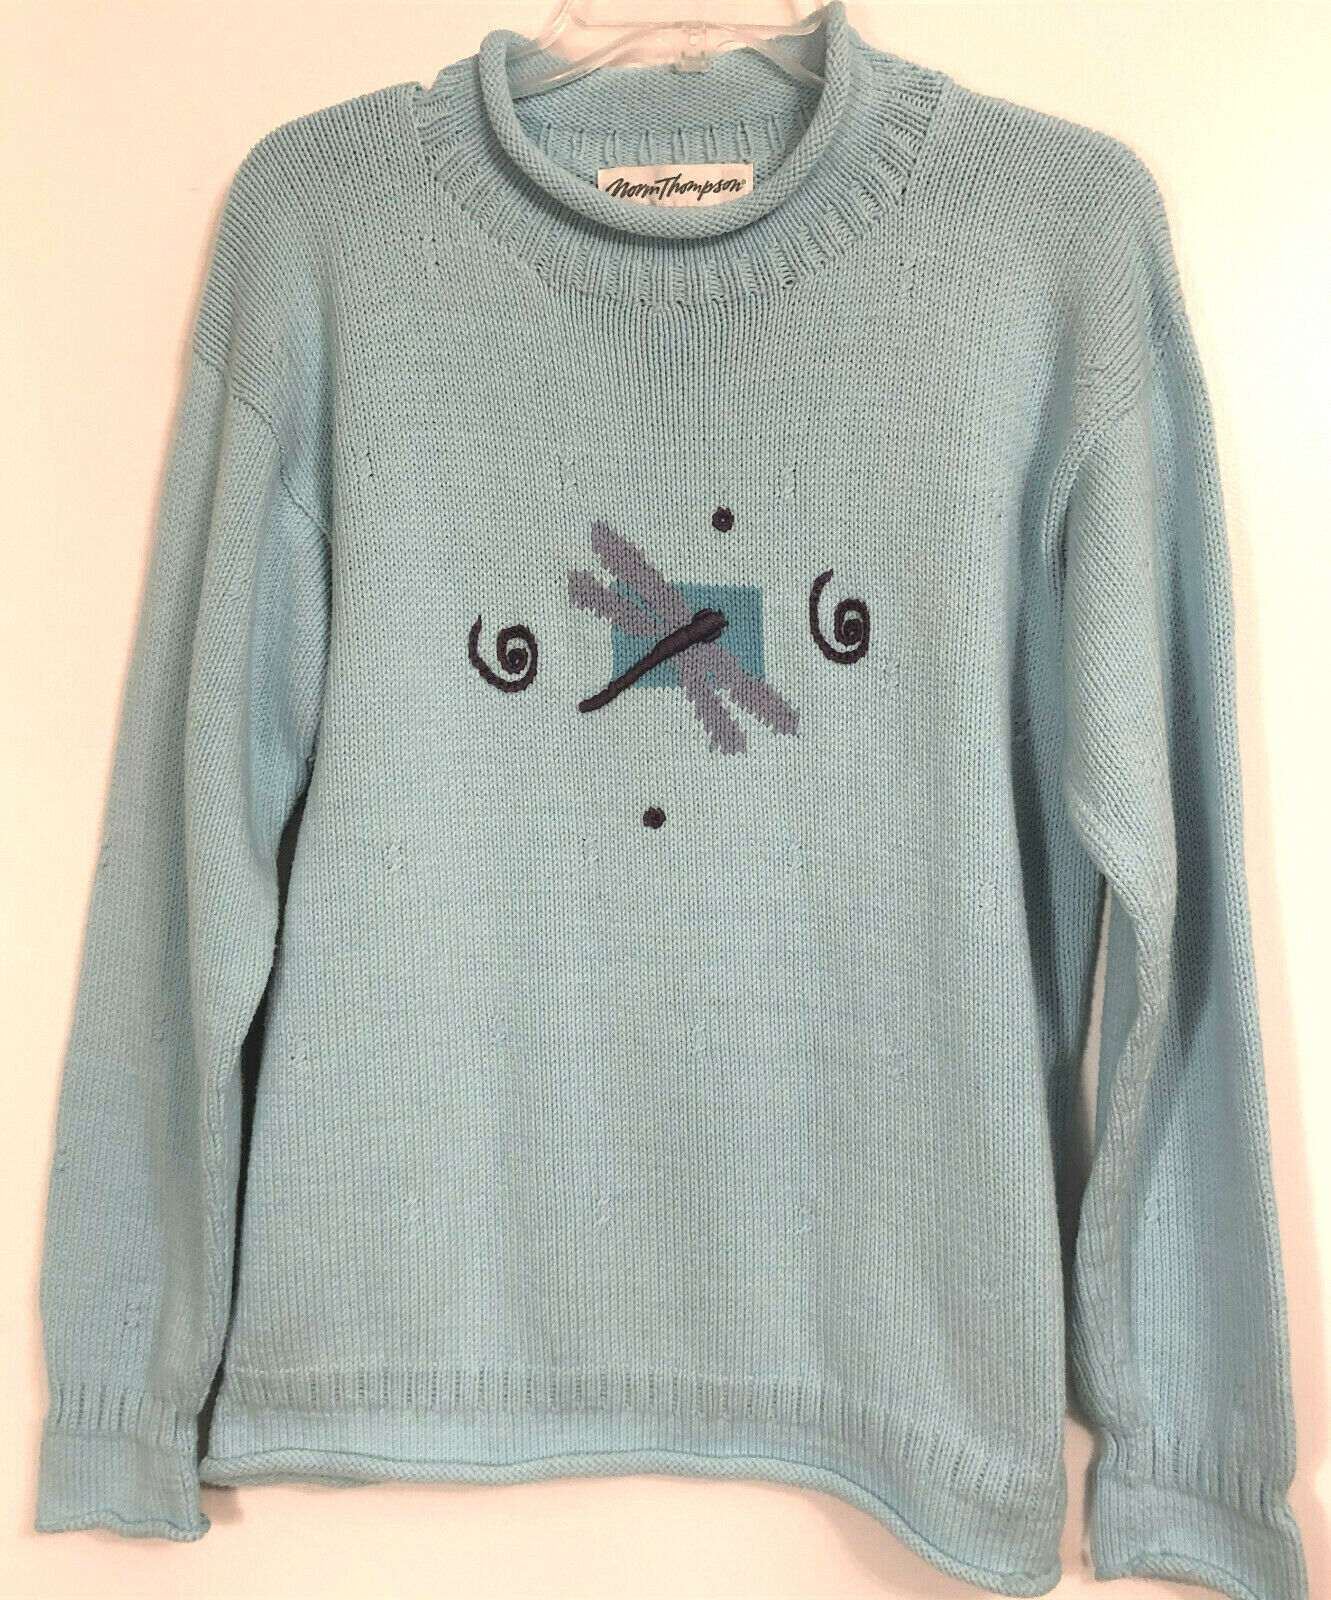 Primary image for Vintage Norm Thompson Embroidered Dragonfly Blue Cotton Sweater Size L